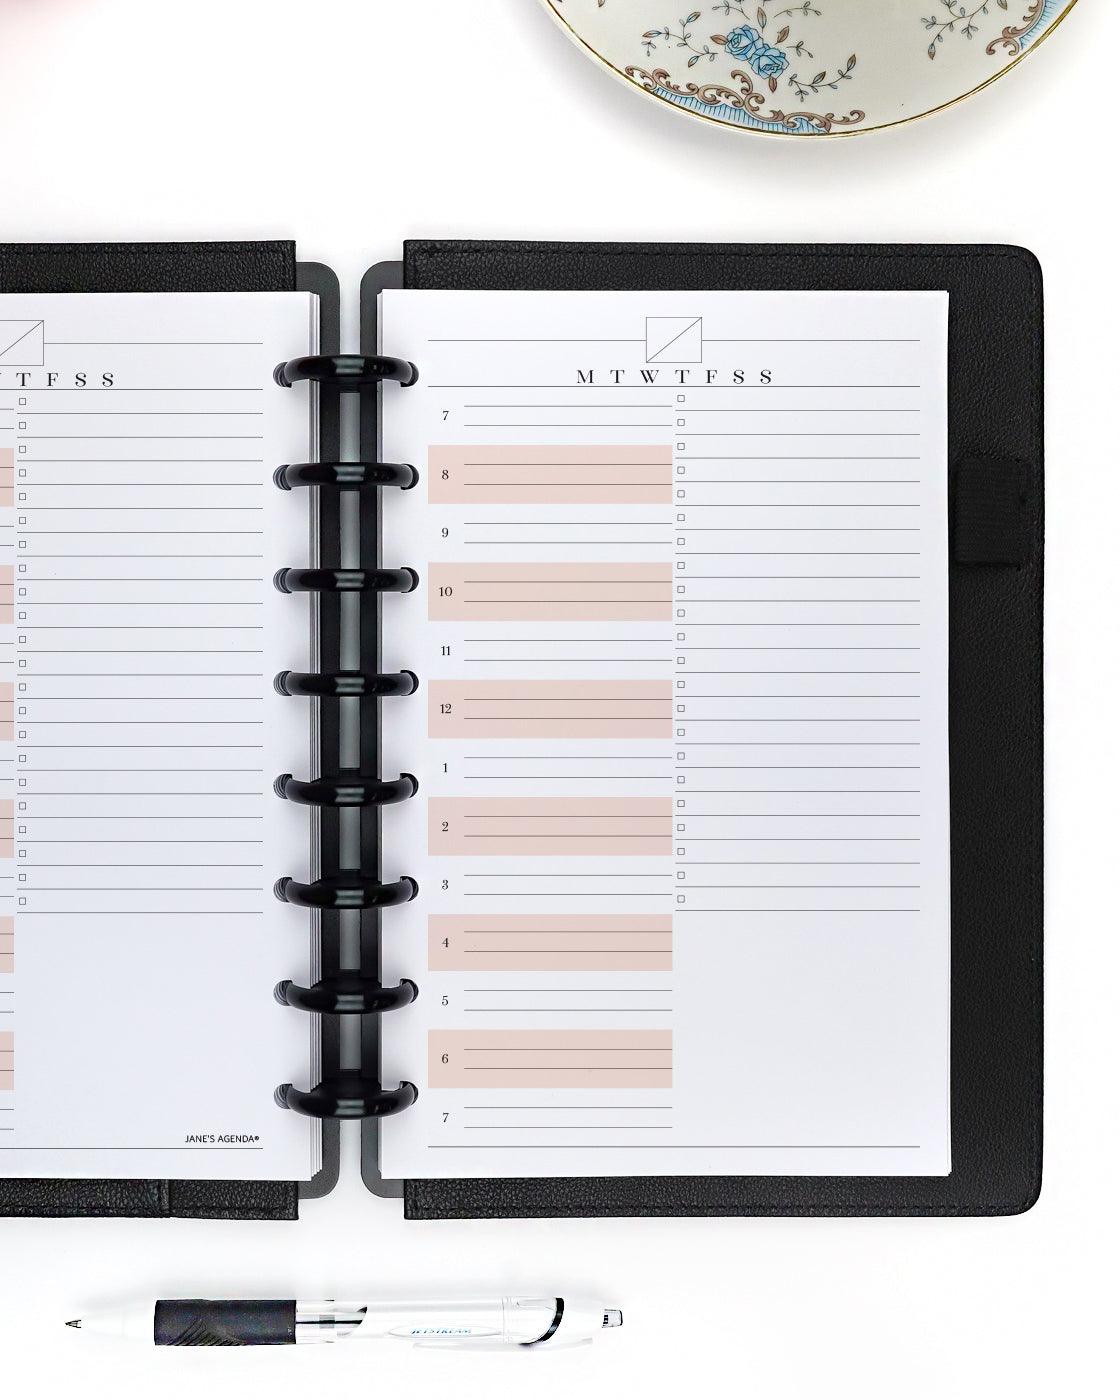 Planner inserts & refills for 6 ring and discbound planners